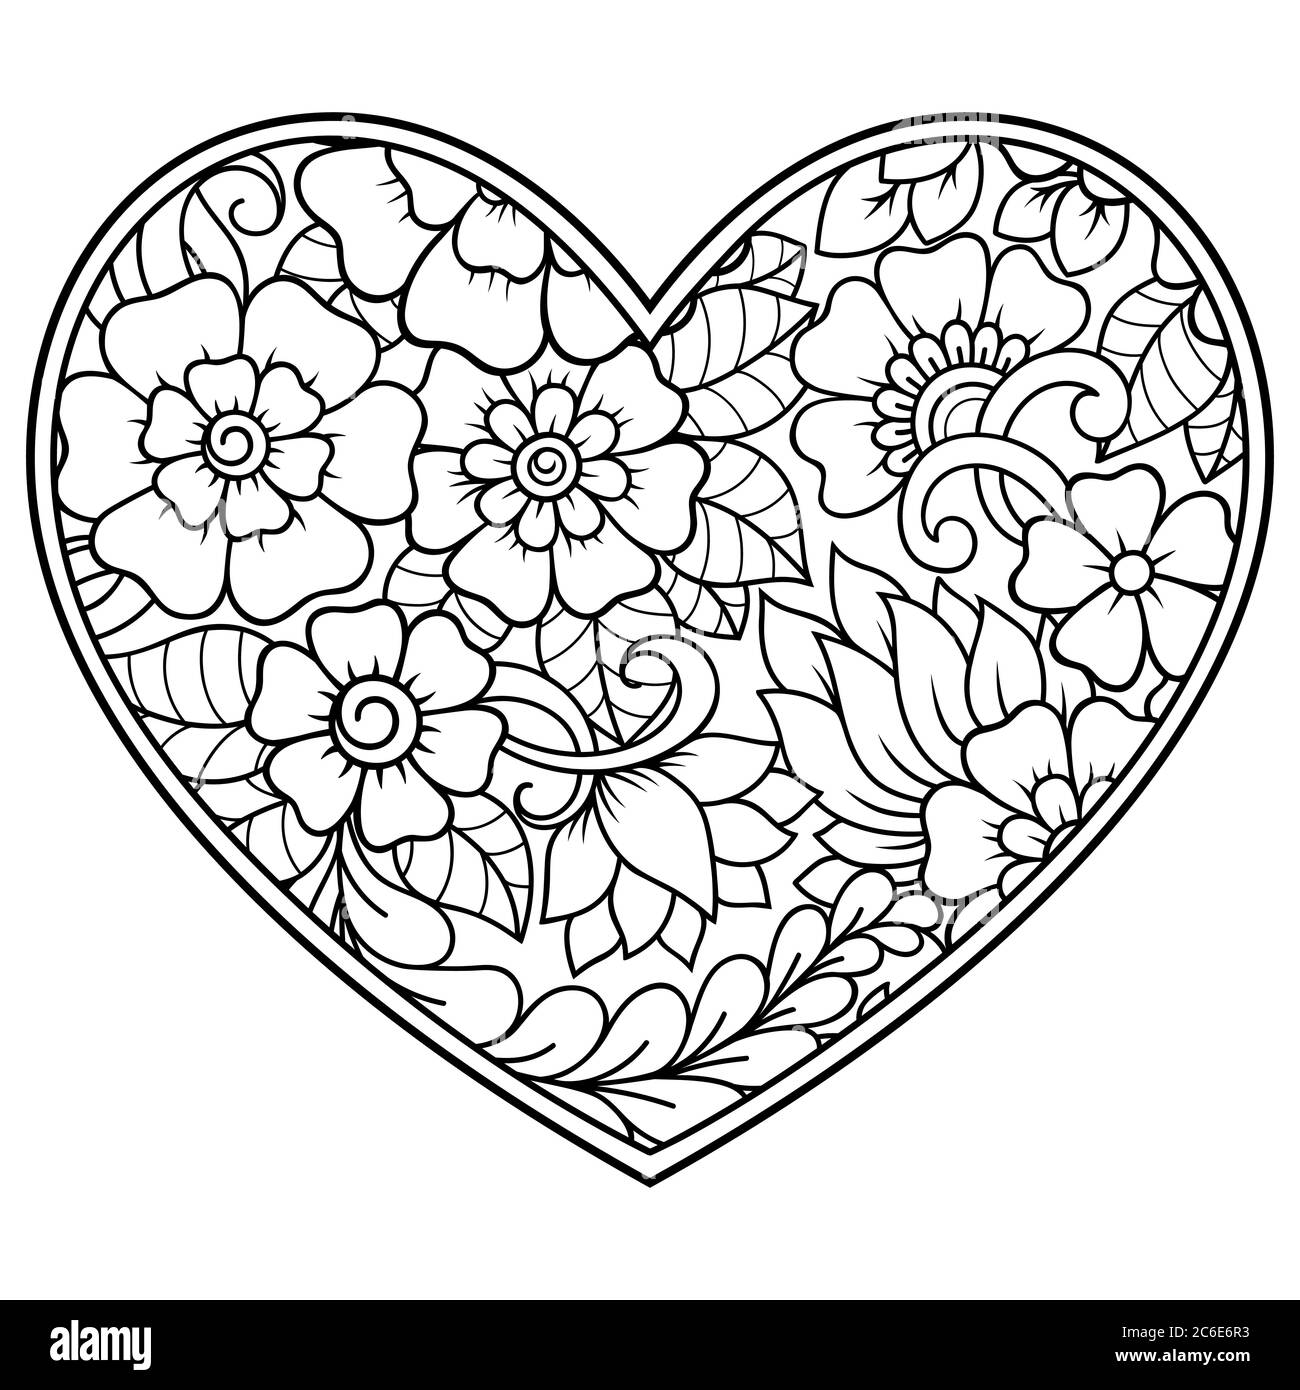 Mehndi flower pattern in form of heart for Henna drawing and tattoo. Decoration in ethnic oriental, Indian style. Coloring book page. Stock Vector